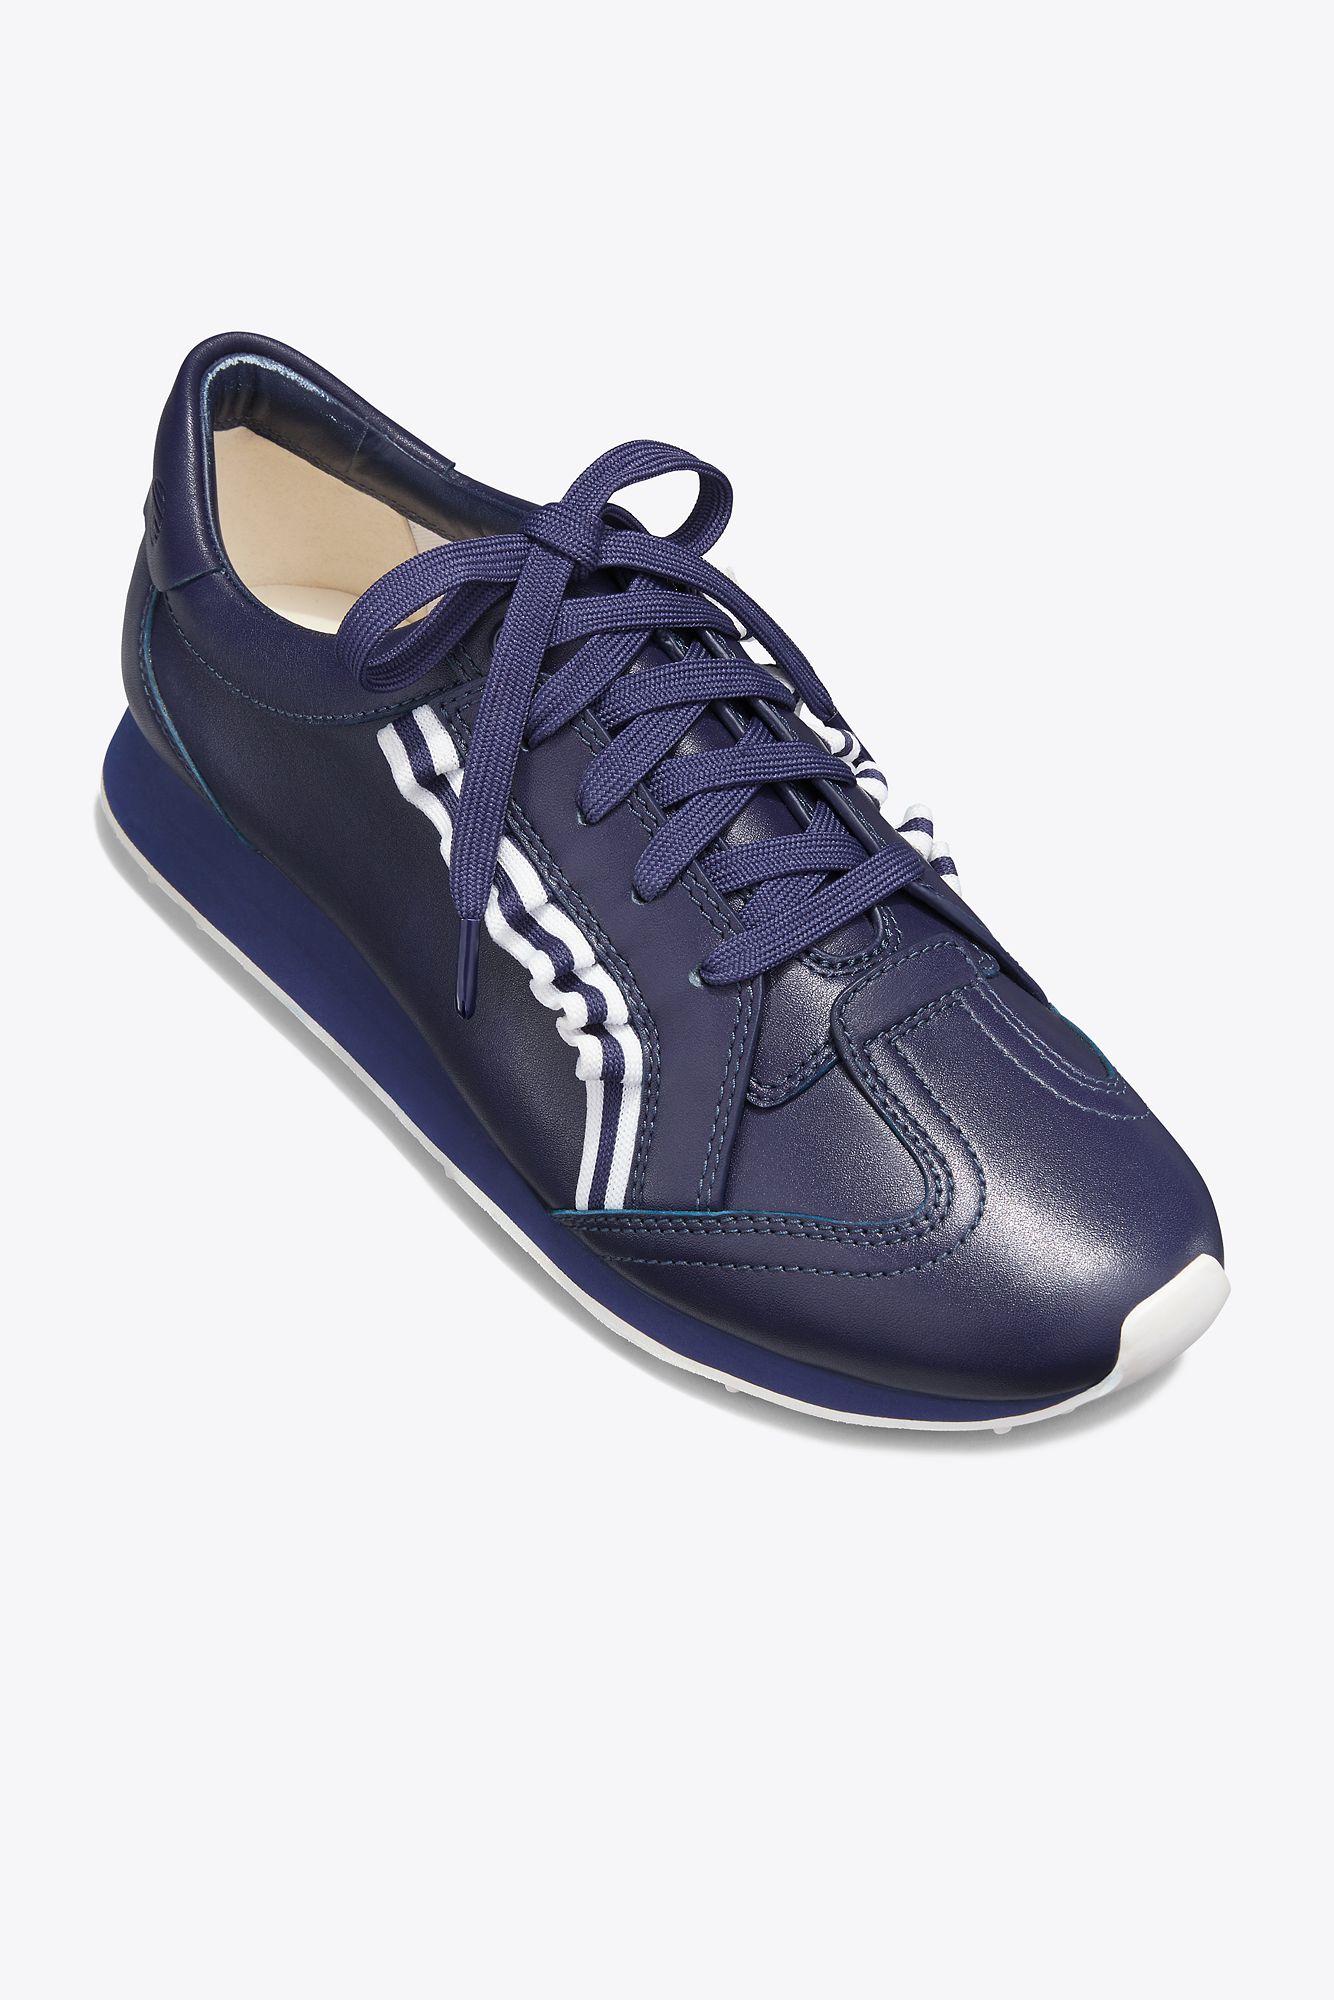 Tory Sport Leather Golf Ruffle Trainers in Blue - Lyst